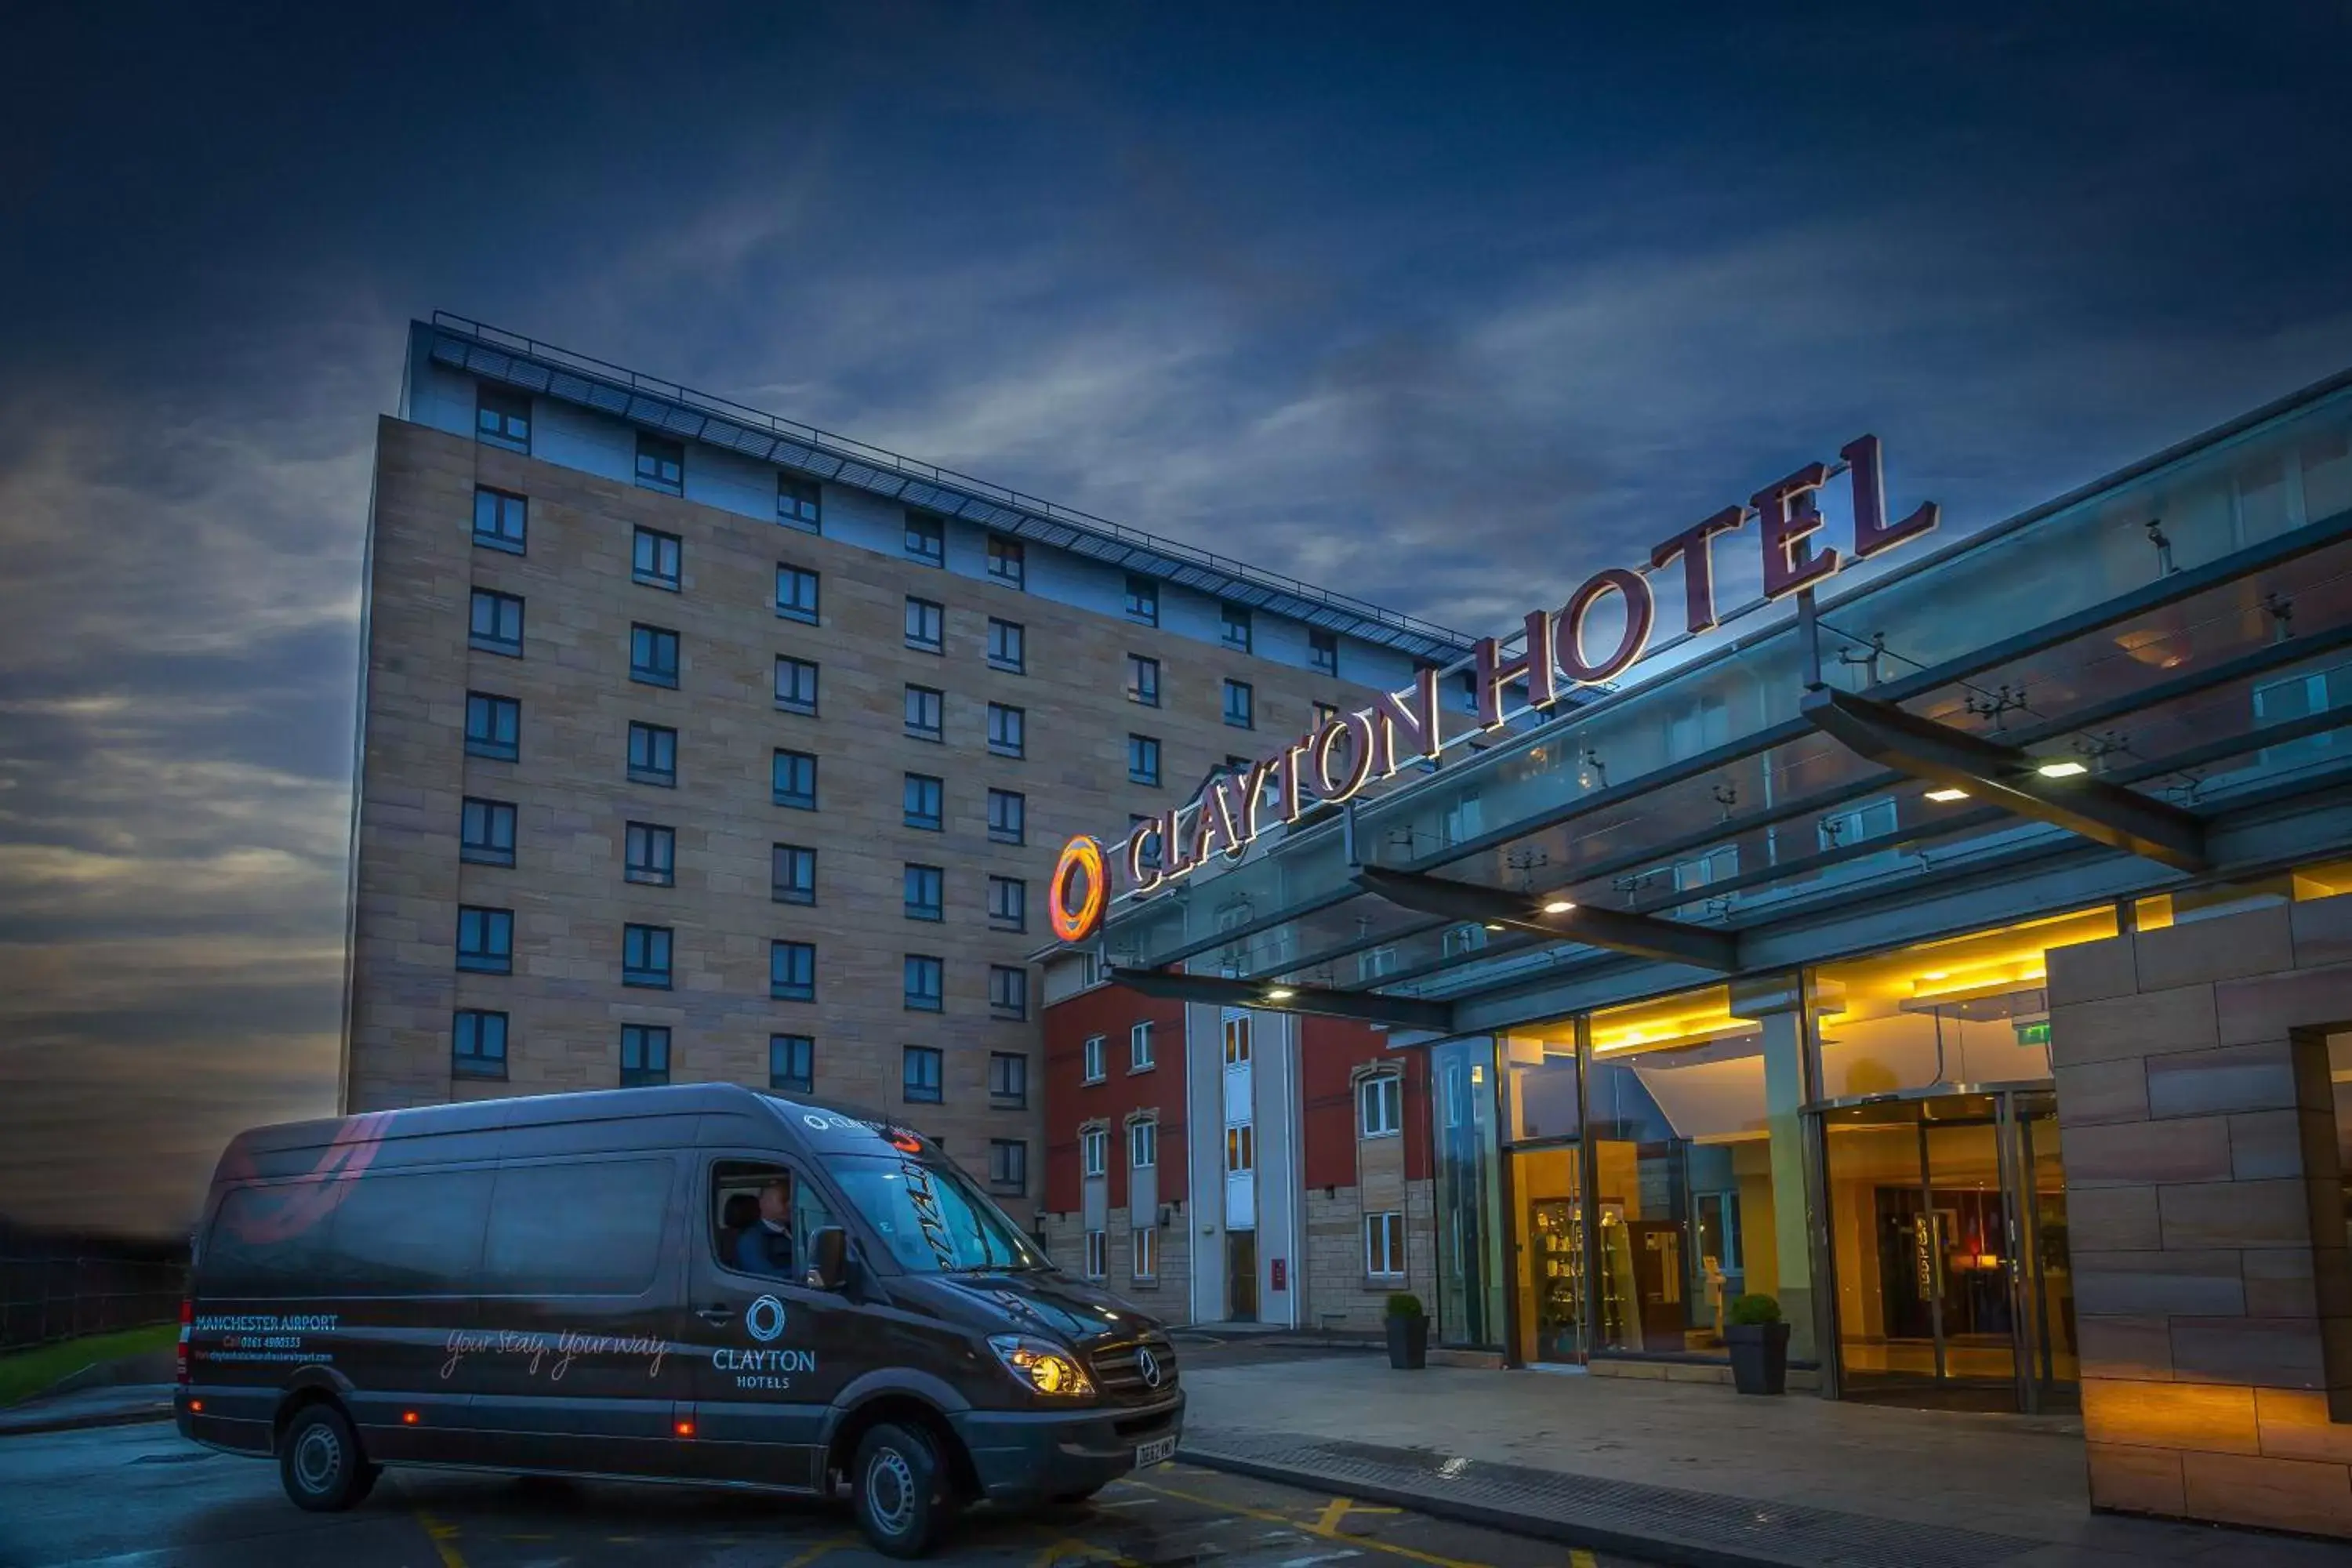 On site in Clayton Hotel, Manchester Airport